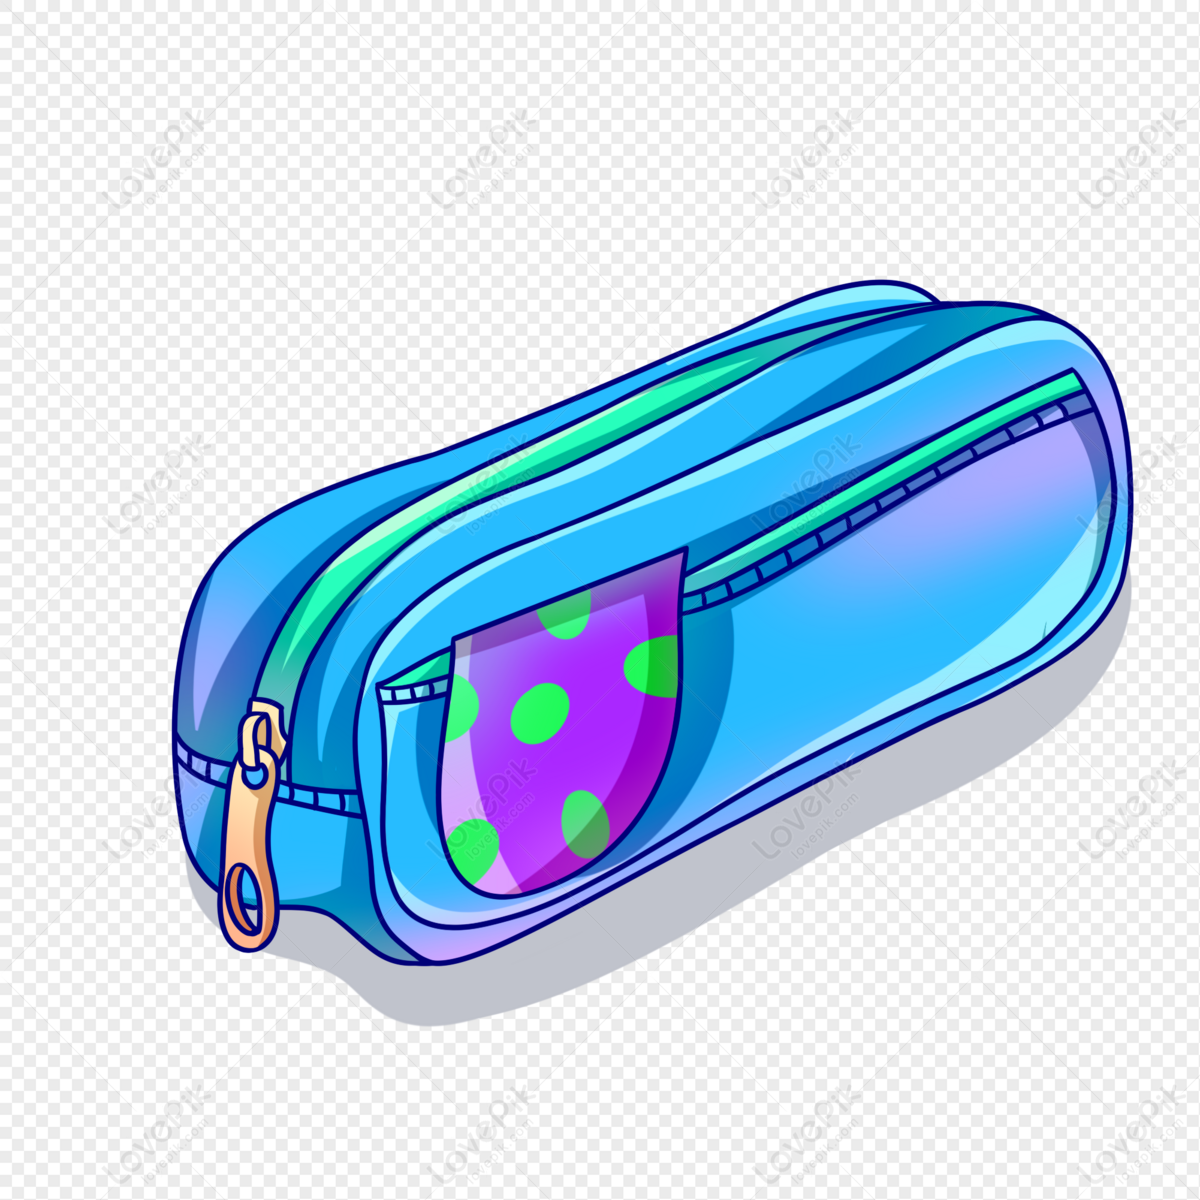 A Blue Cartoon Pencil Case PNG Transparent And Clipart Image For Free  Download - Lovepik | 401412466